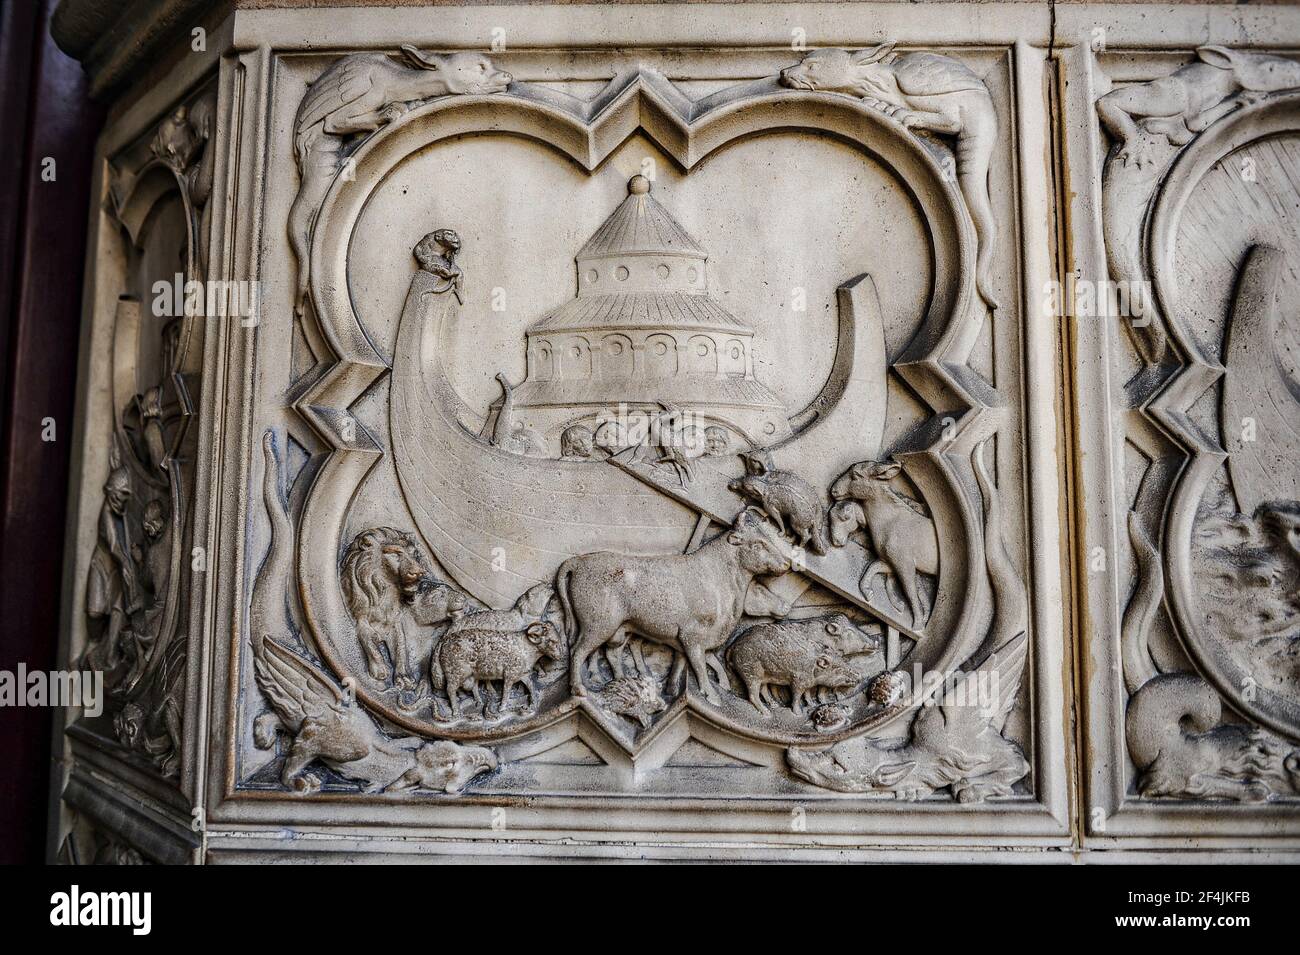 Paris, France - July 18, 2019: Bas relief depicting Noah's Ark and the medieval Armenian Zvartnots cathedral at the Sainte Chapelle chapel in Paris Stock Photo